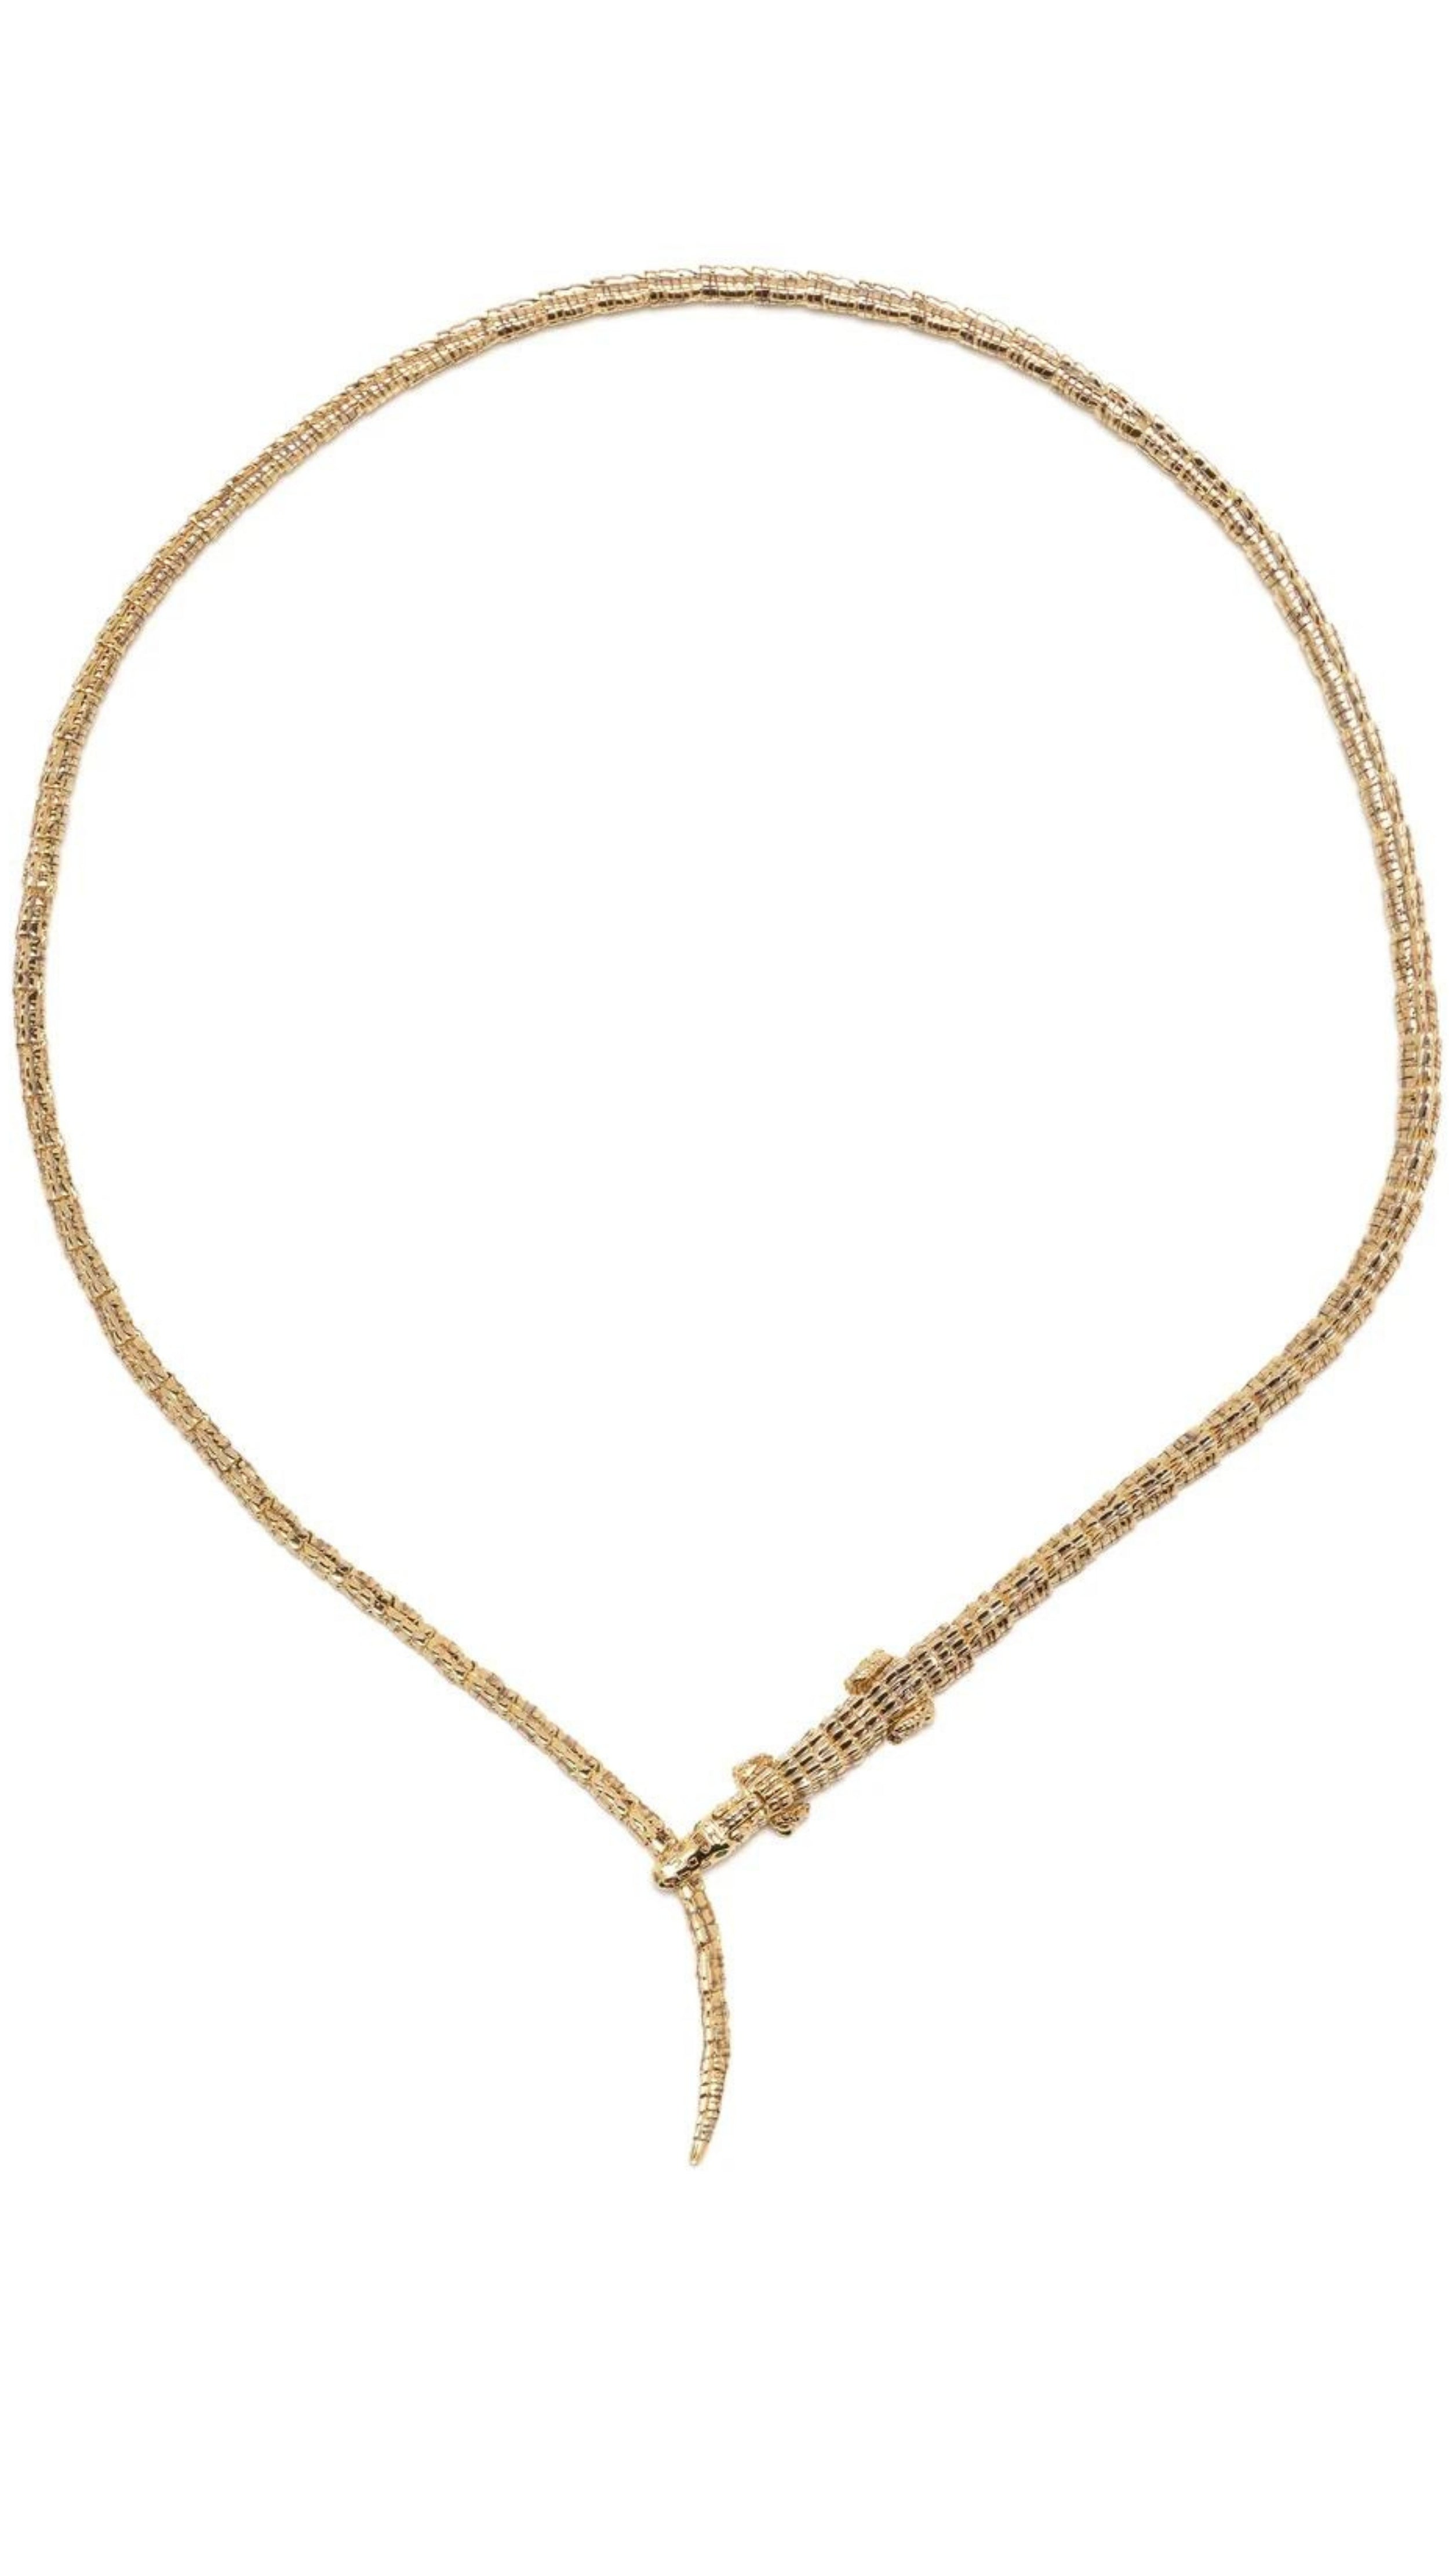 Bibi van der Velden The Alligator Wrap Thin Necklace made from 18k yellow gold in the shape of body of an alligator. Its elongated tail serves as the necklace's length and features a closure of the alligator's jaws snapping down on its own tail in the front. This necklace has  tsavorite eyes and moving feet. Shown from the top.